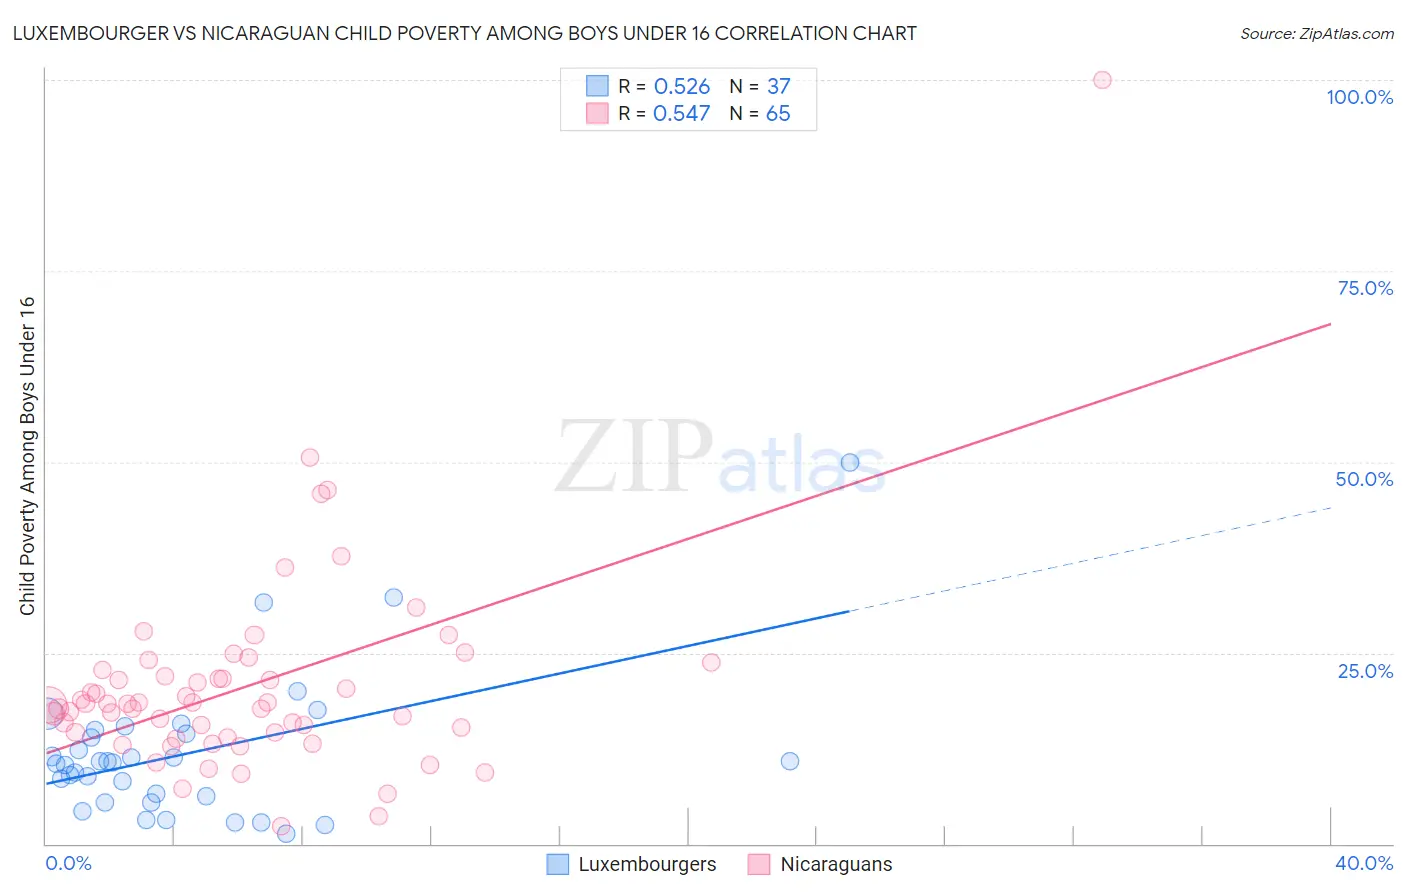 Luxembourger vs Nicaraguan Child Poverty Among Boys Under 16